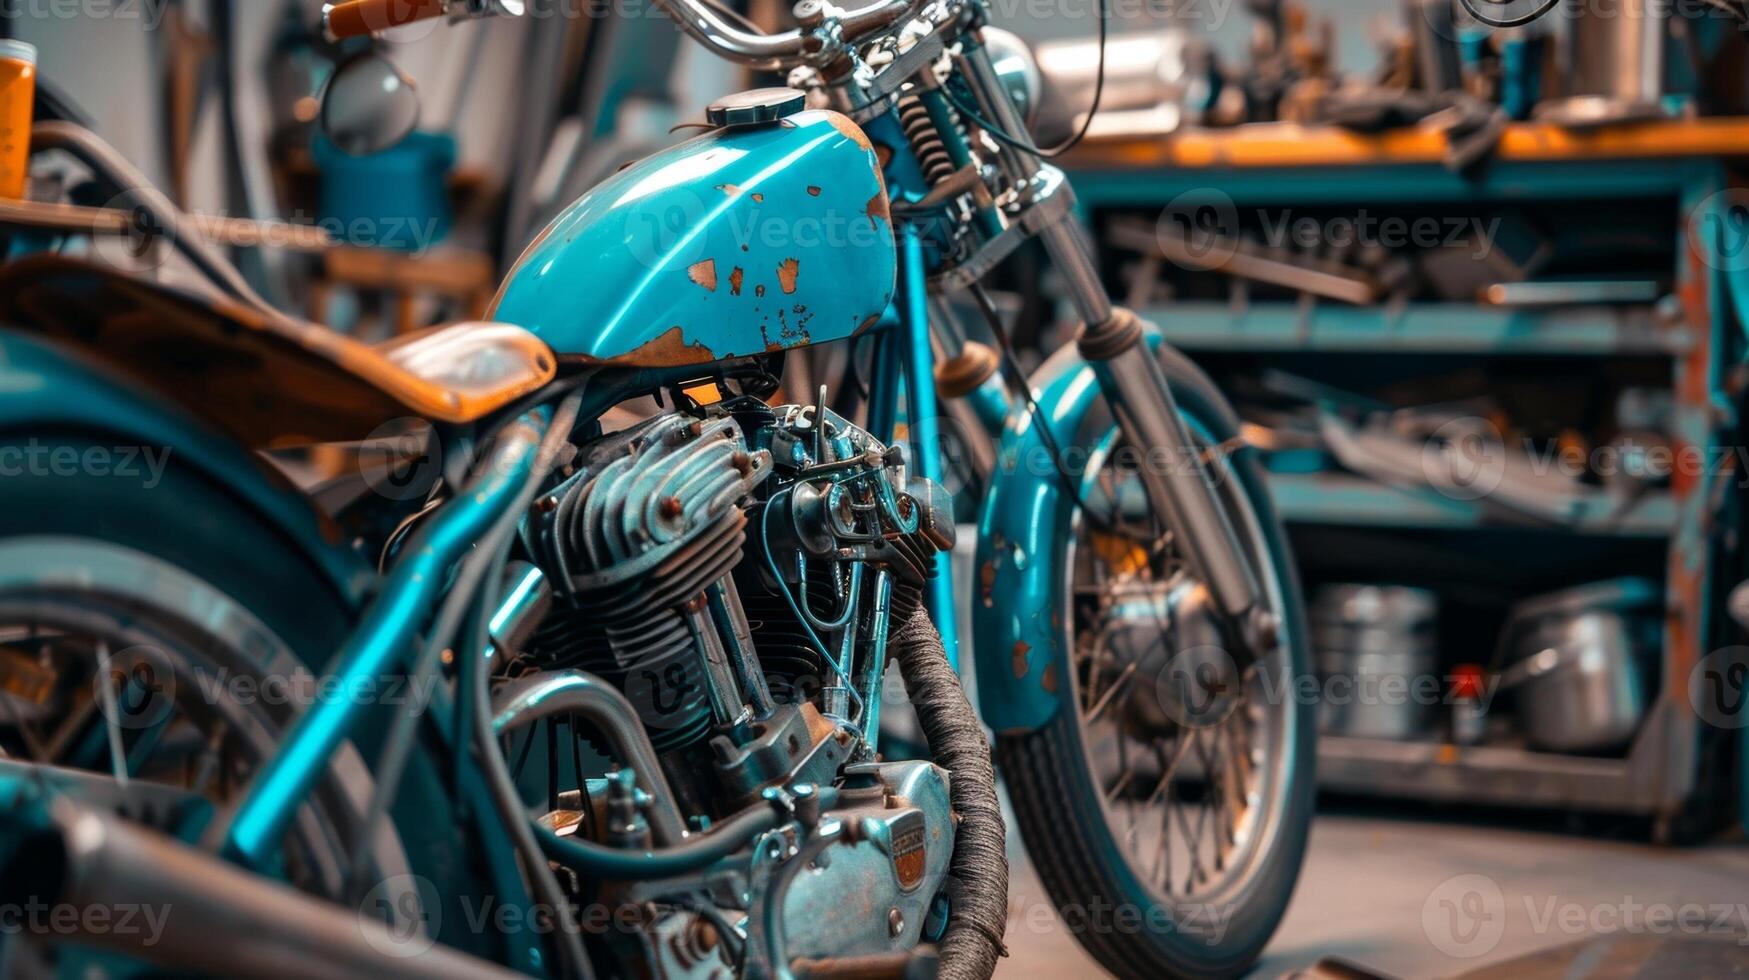 The skilled craftsmen pay close attention to even the smallest details ensuring that every custom bike is flawlessly built to match the owners specifications photo